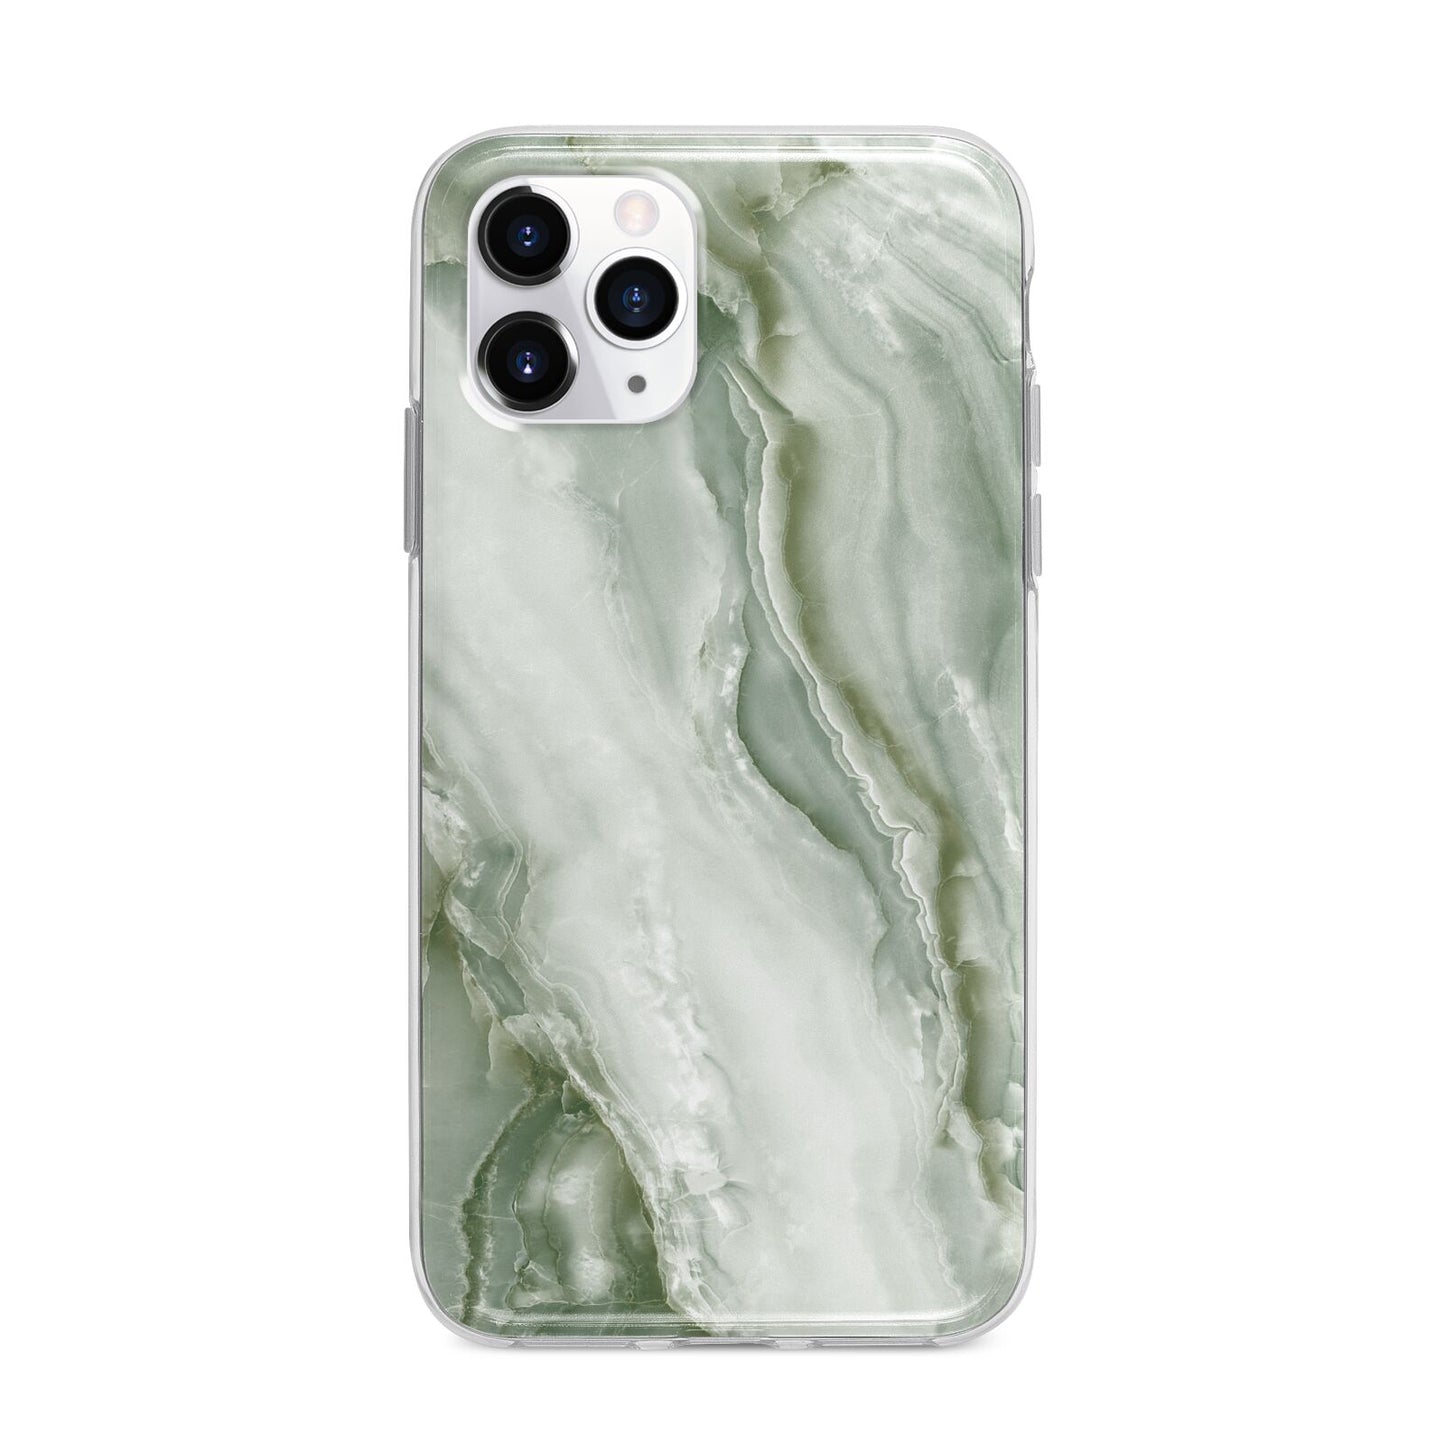 Pistachio Green Marble Apple iPhone 11 Pro Max in Silver with Bumper Case